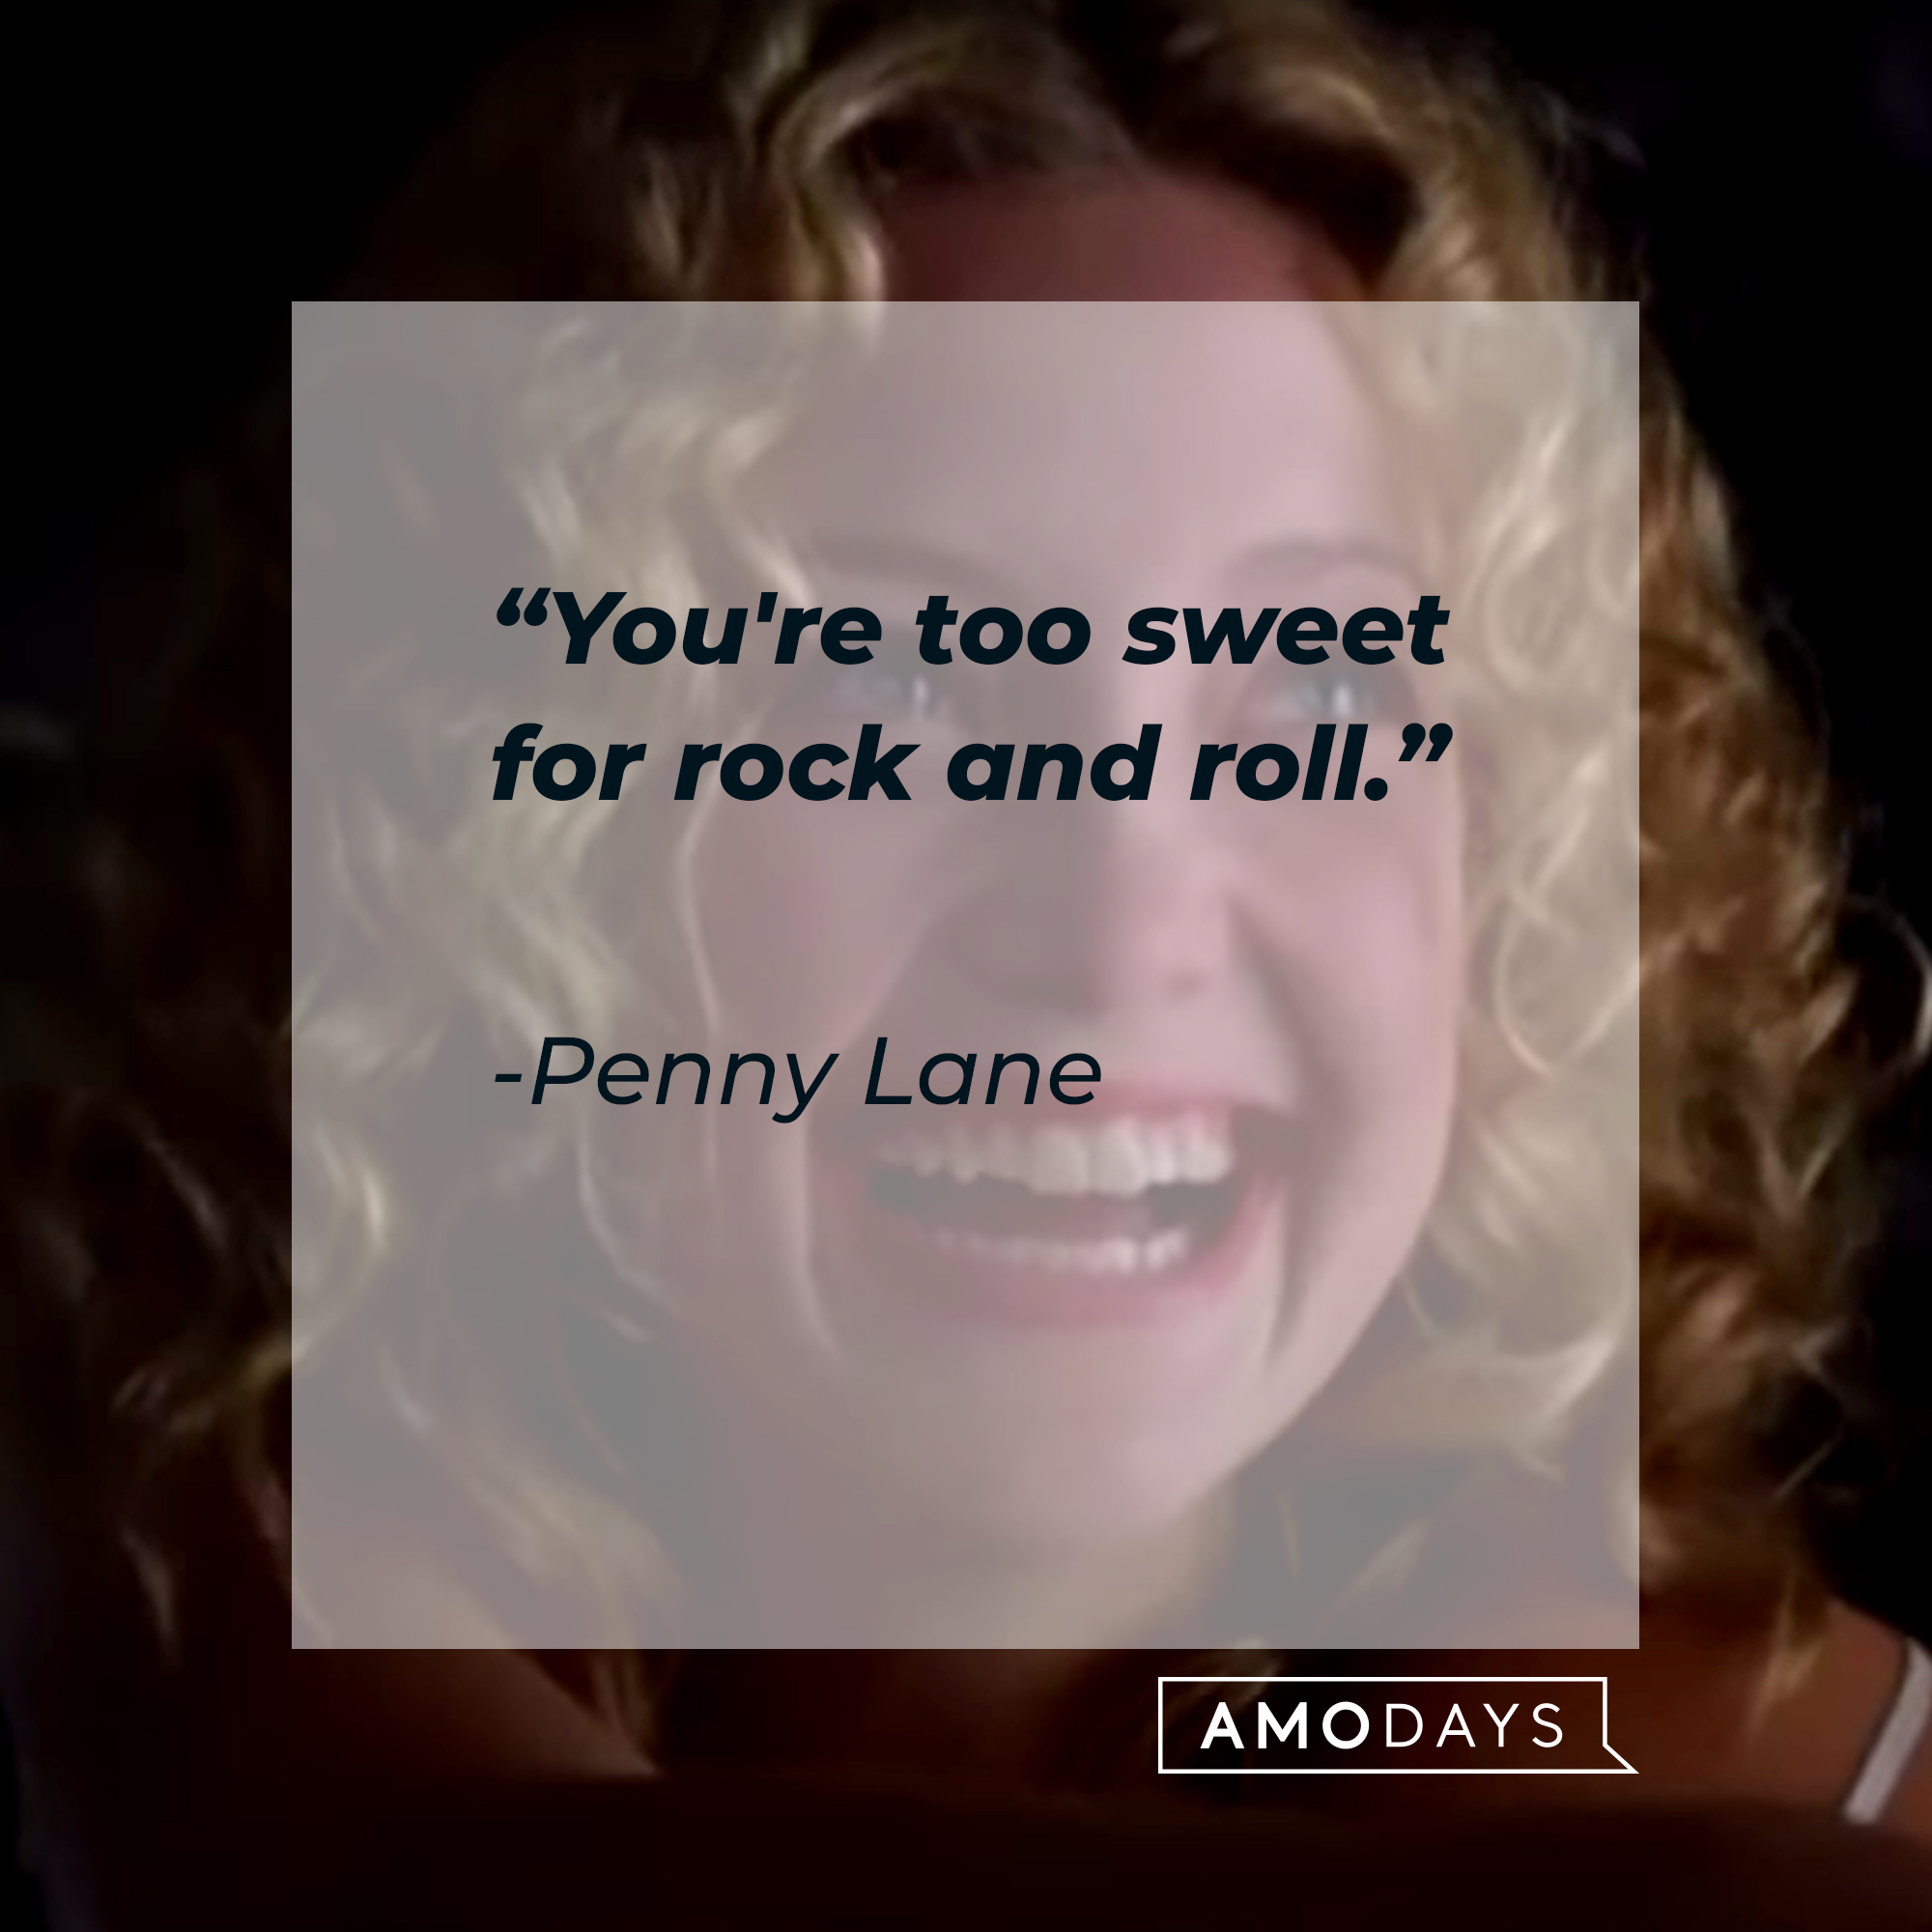 Penny Lane's quote: “You're too sweet for rock and roll.” | Source: facebook.com/AlmostFamousTheMovie